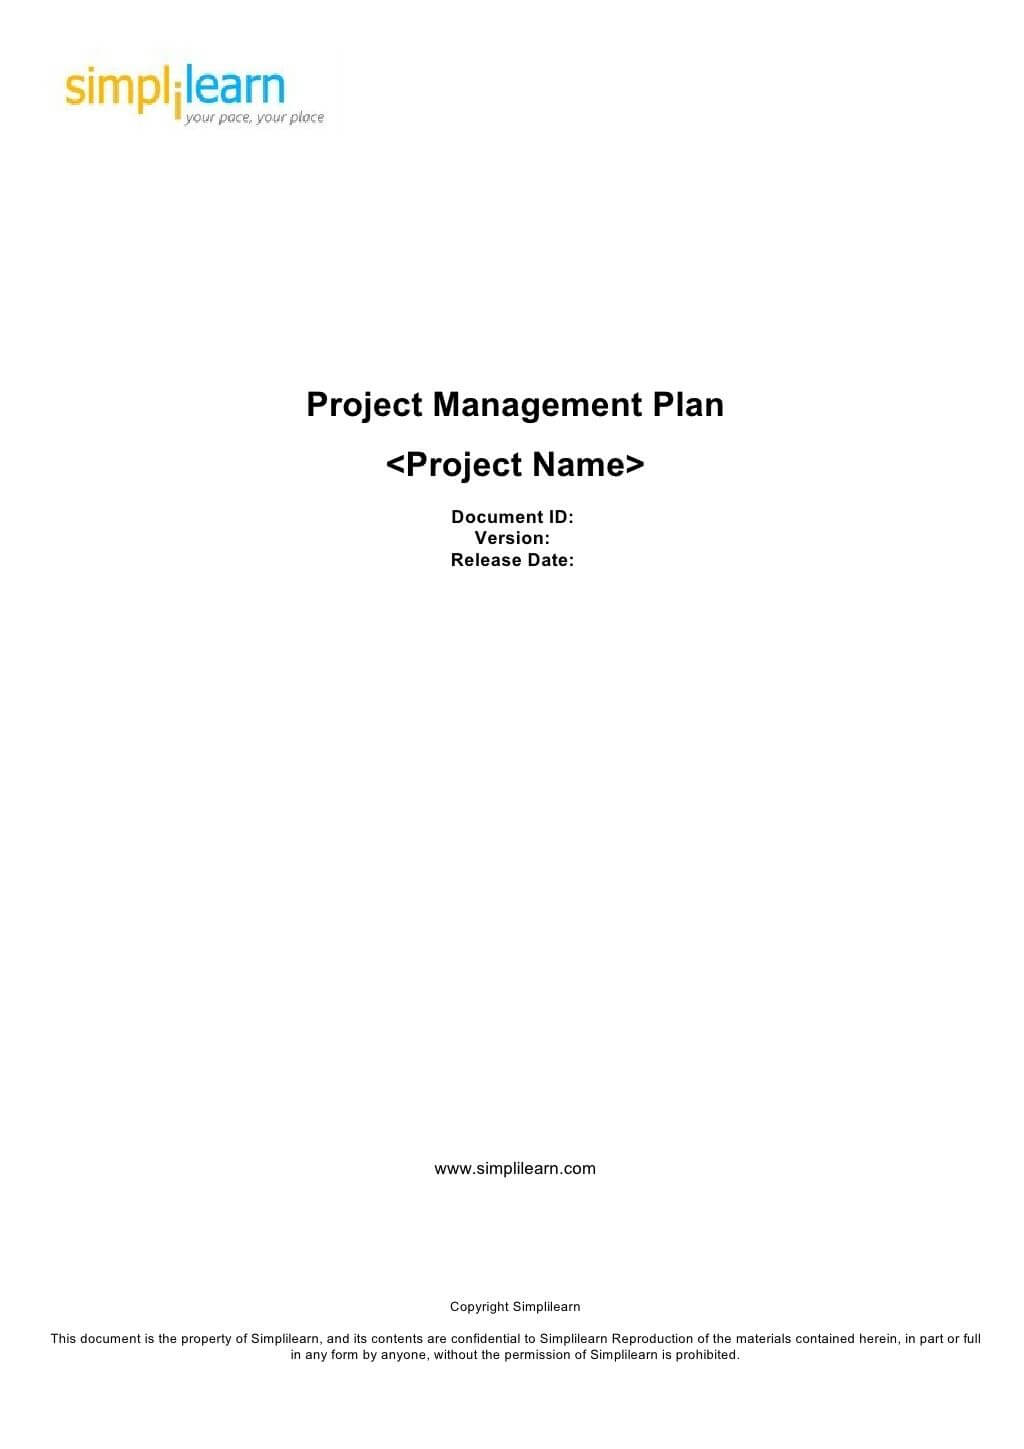 Project Management Plan Template | Project Management In Report Content Page Template